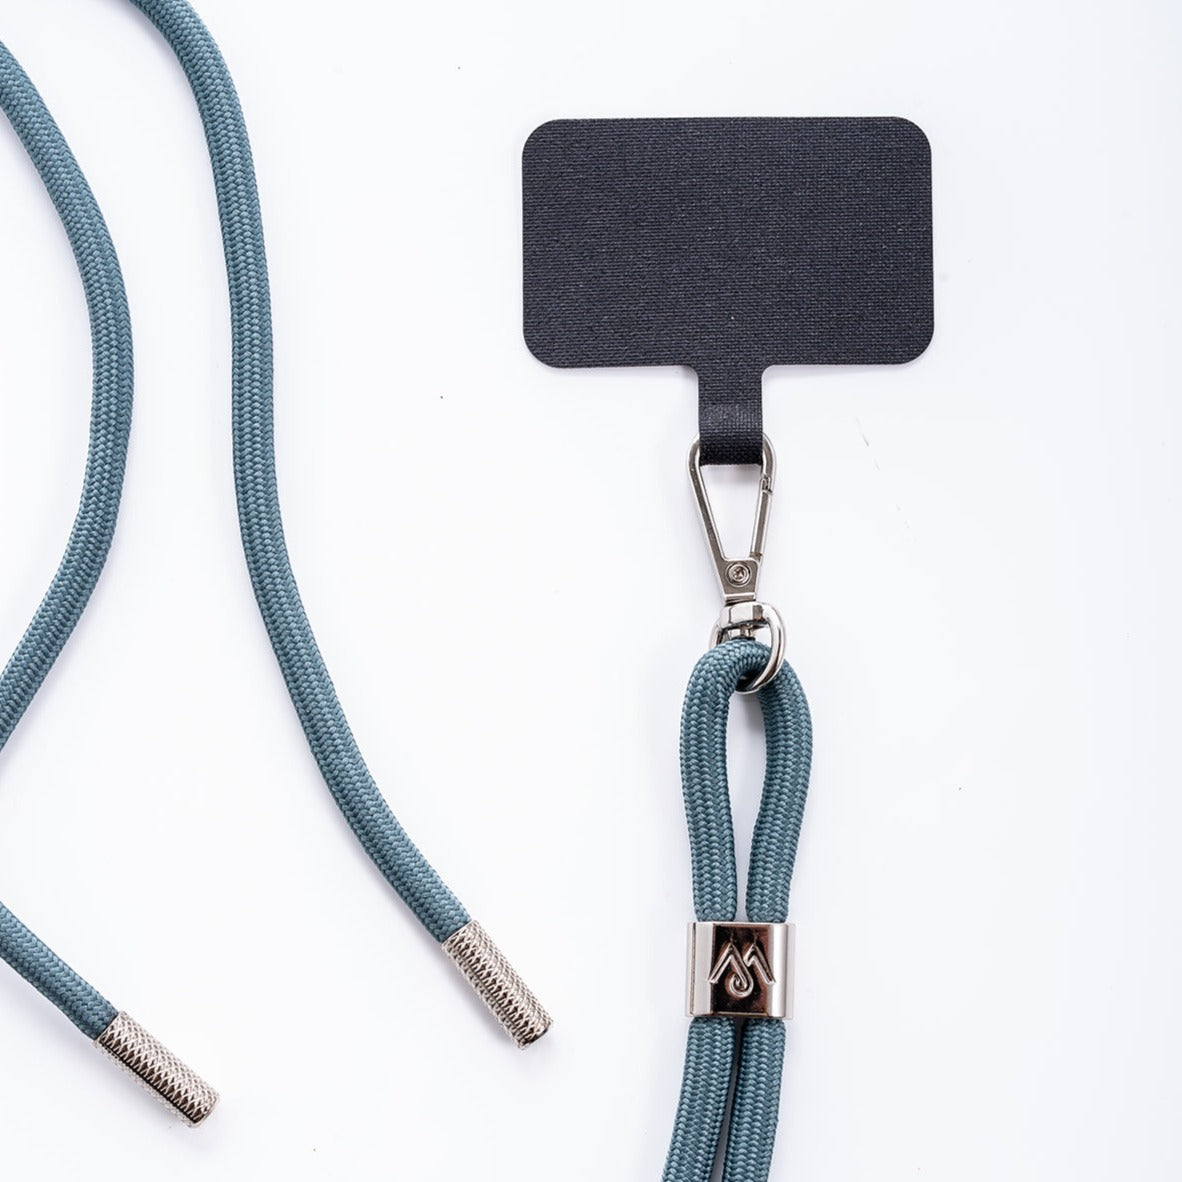 Teal Dream Phone Lanyard (Includes Insert)